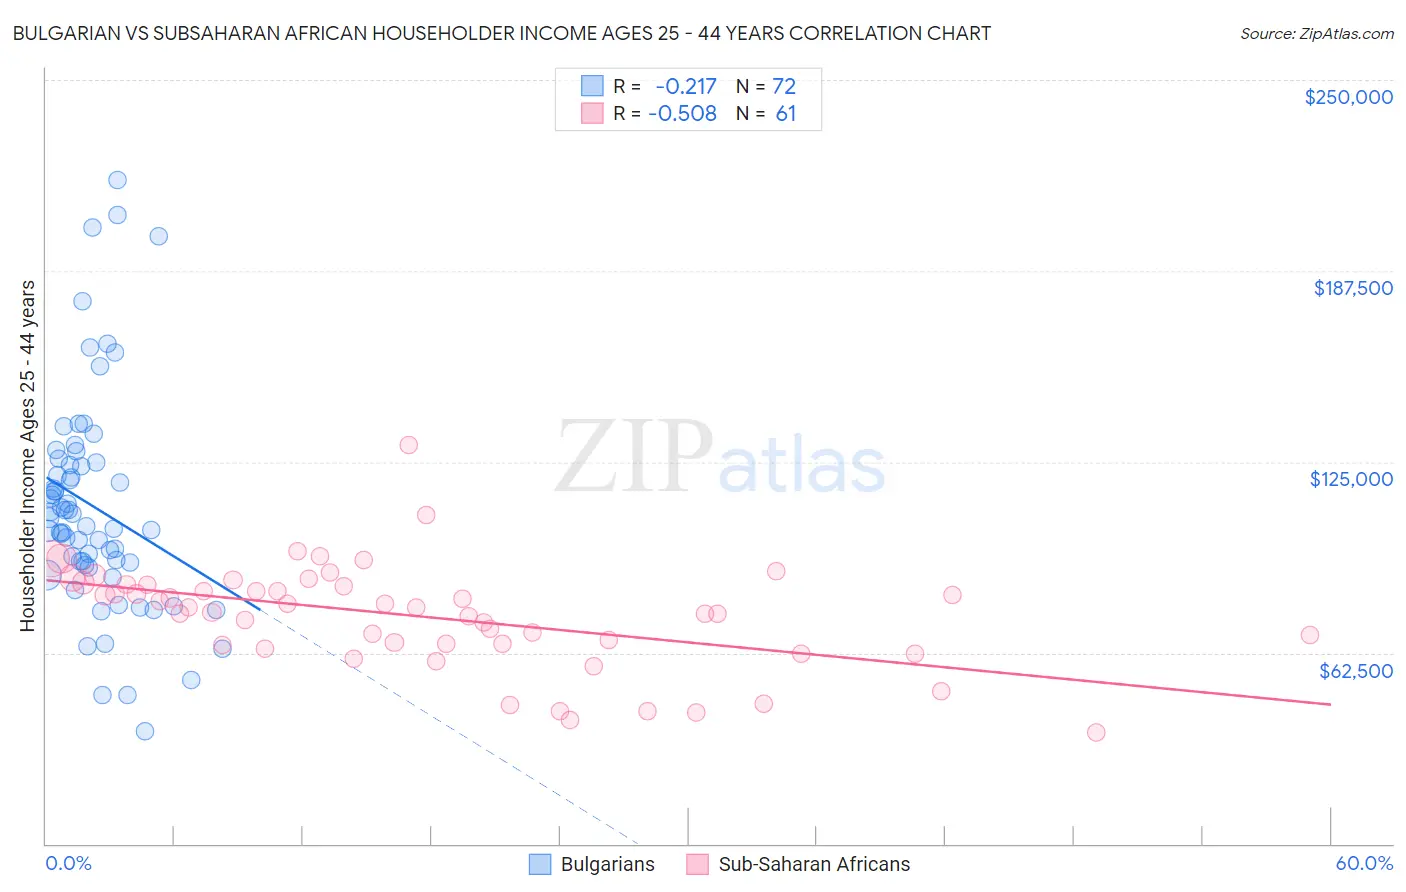 Bulgarian vs Subsaharan African Householder Income Ages 25 - 44 years